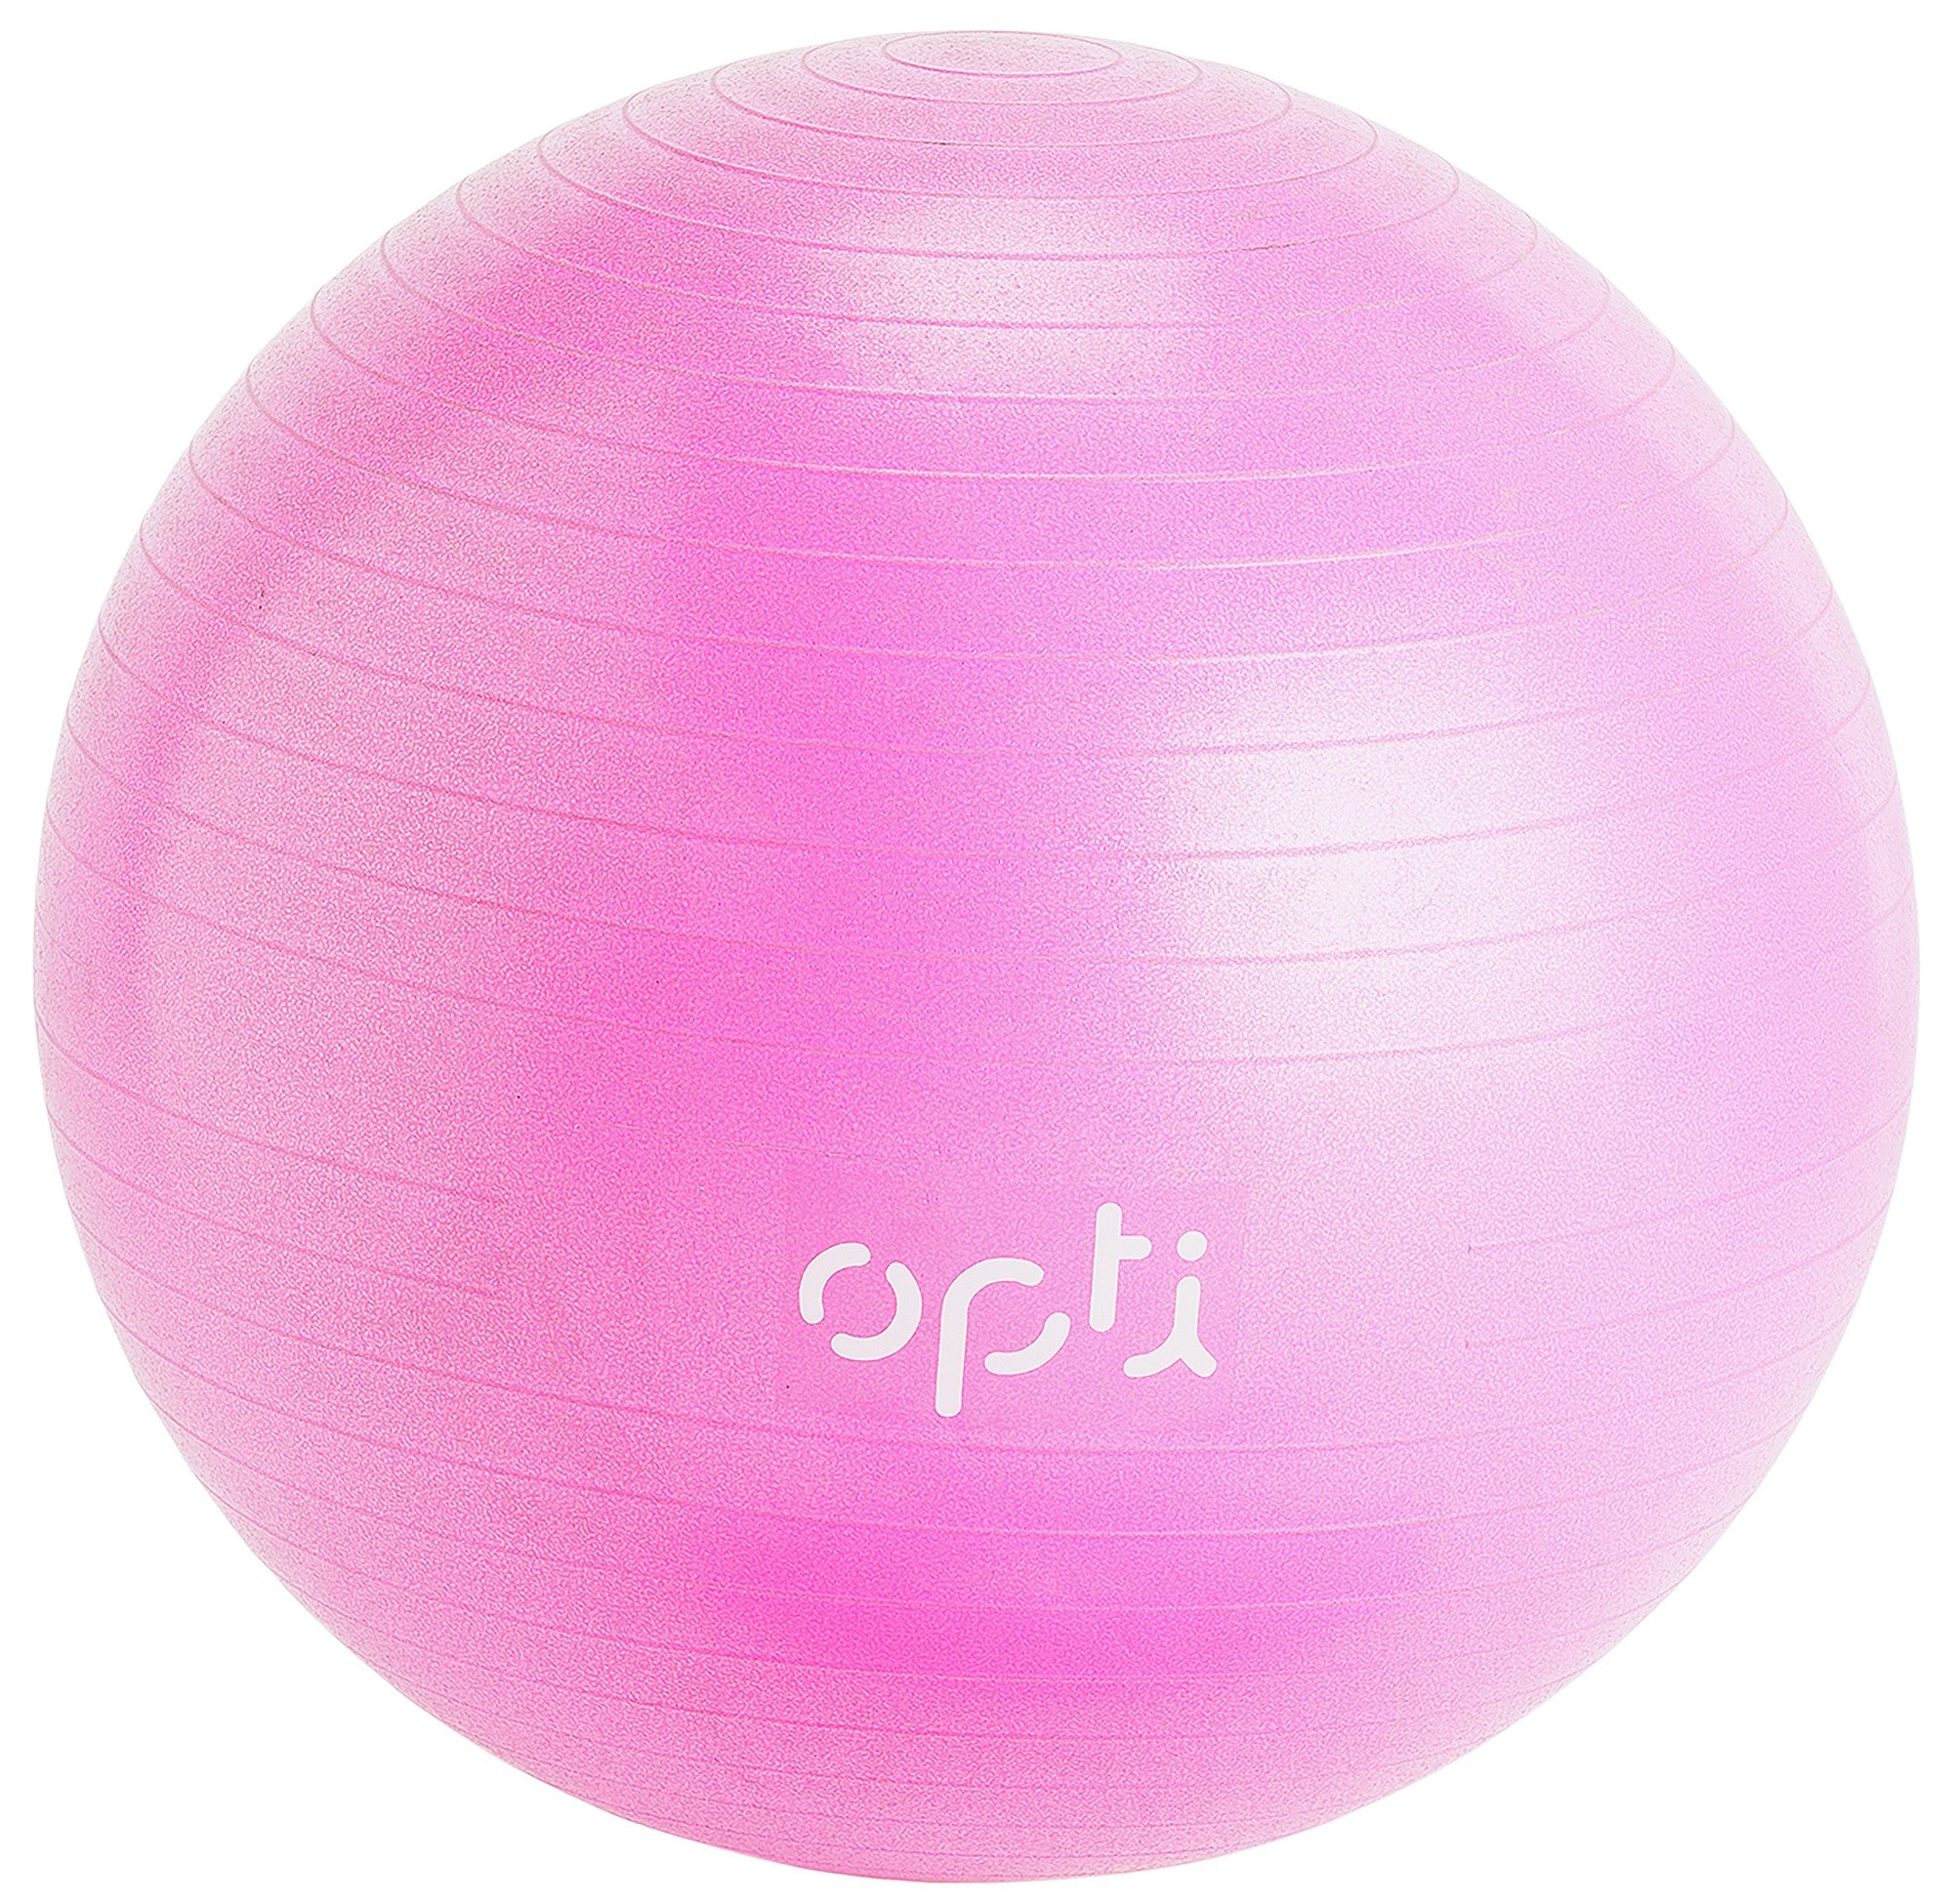 Opti Gym Ball with Bands Reviews